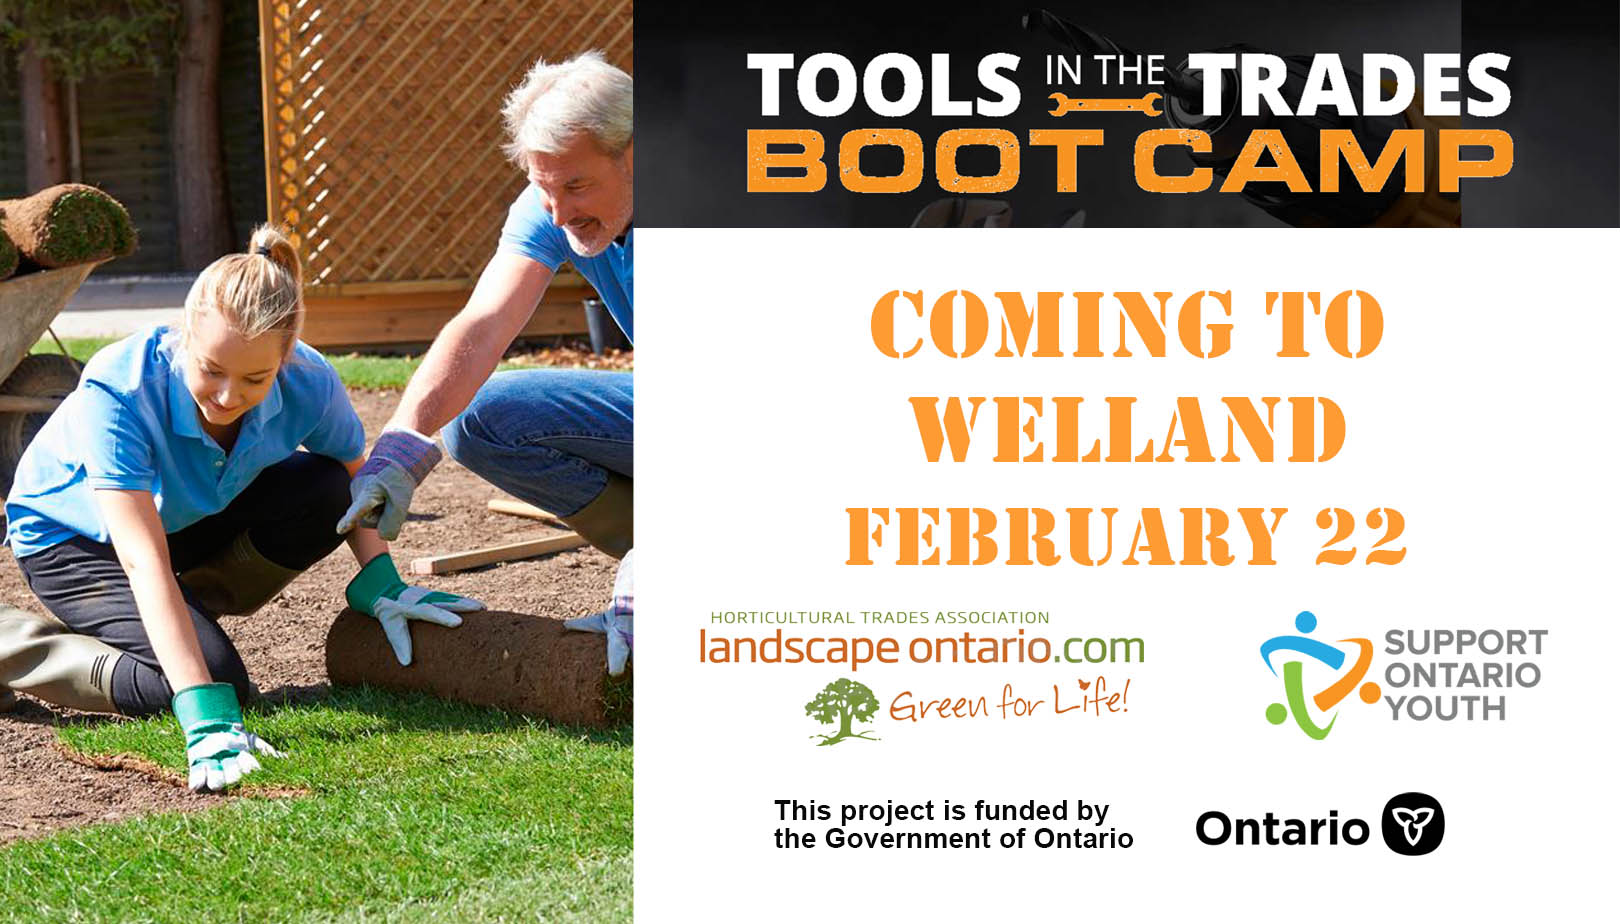 Welland Tools in the Trades Boot Camp